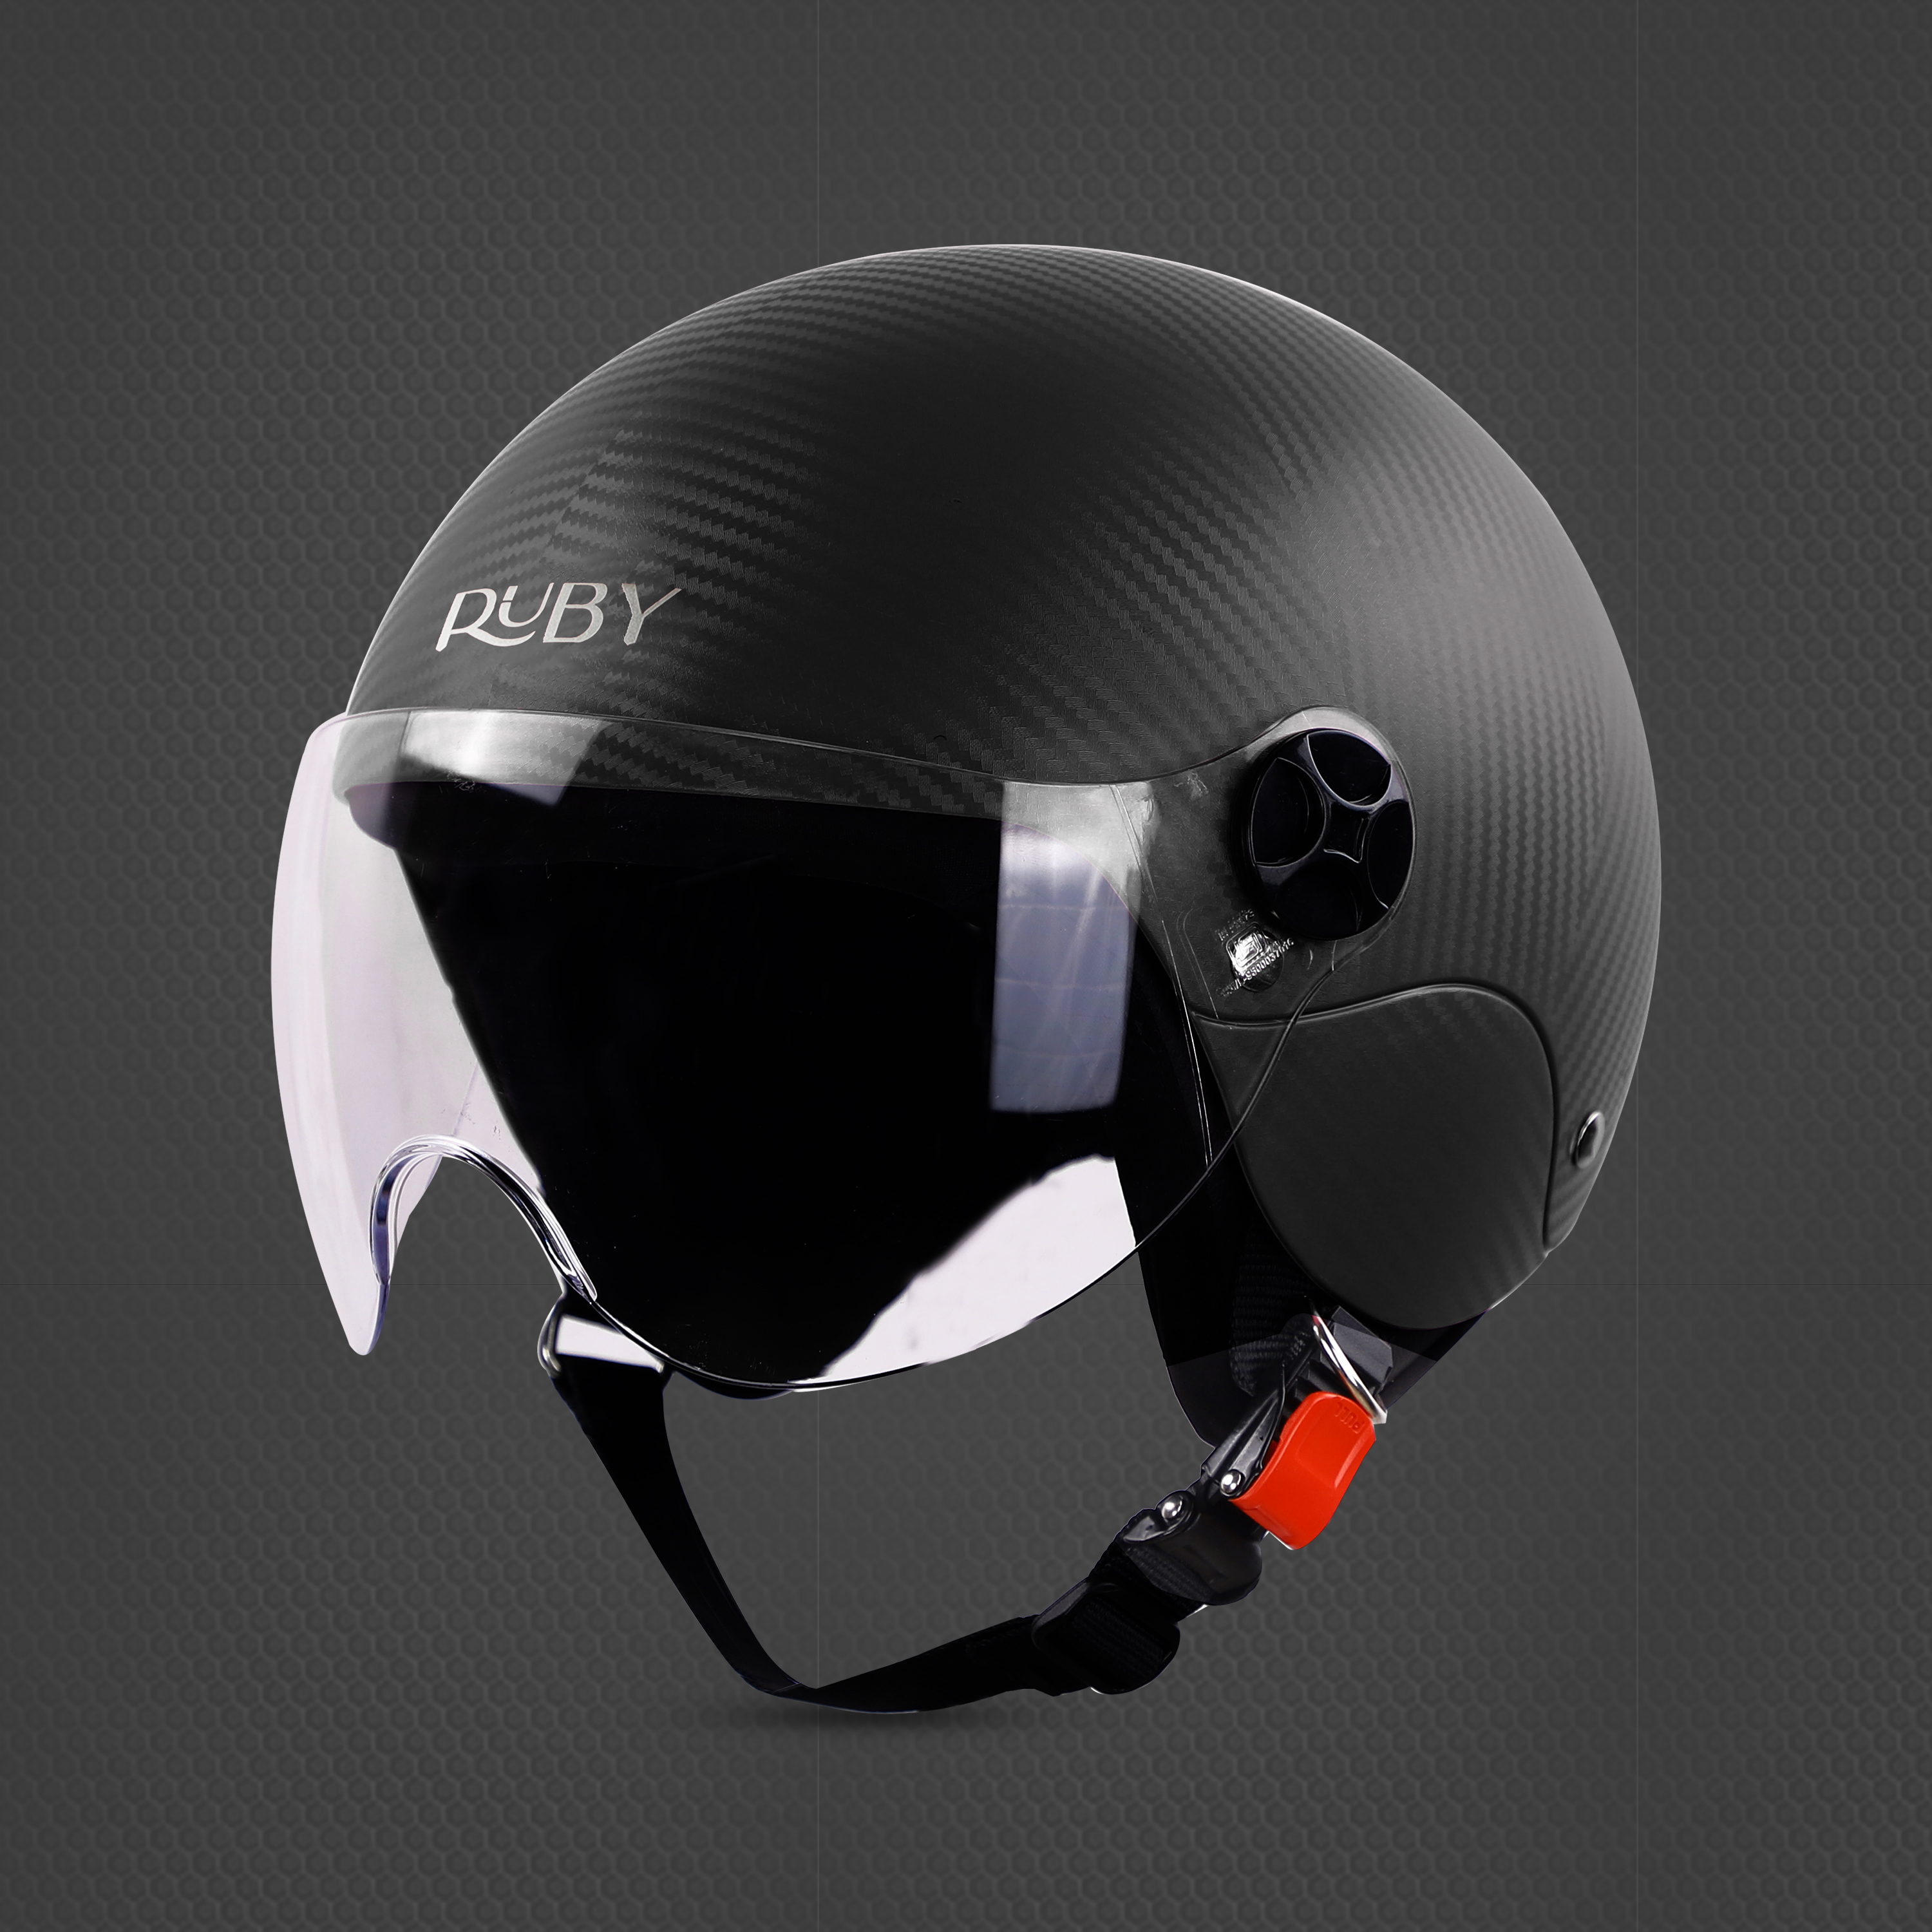 Steelbird SBH-16 Ruby ISI Certified Open Face Helmet (Dashing Black With Clear Visor)